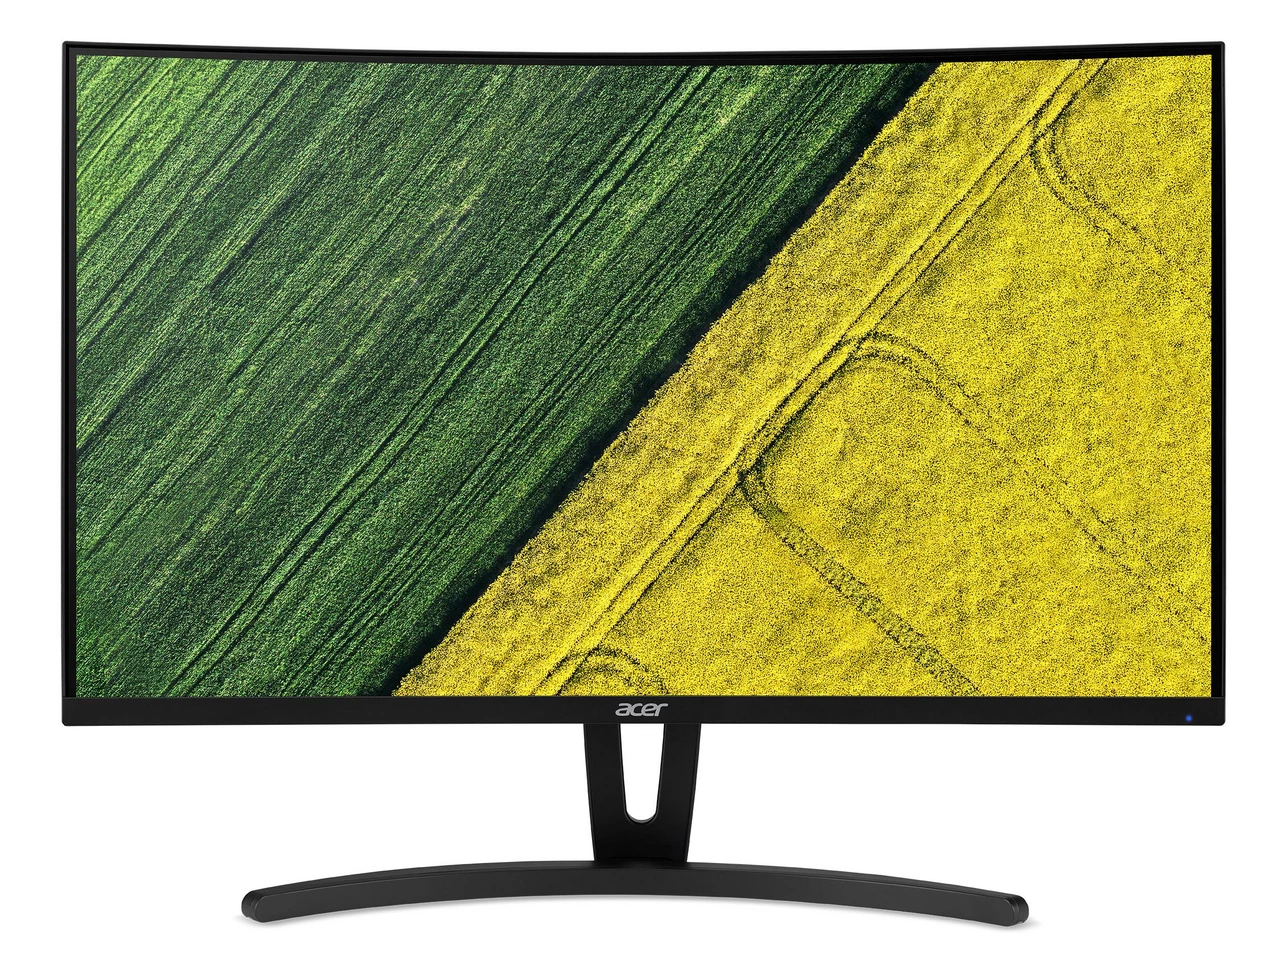 Acer ED273 Bbmiix 27" Curved Full HD (1920 x 1080) Zero Frame Monitor with AMD FreeSync Technology, 75Hz, 1ms VRB - image 1 of 5